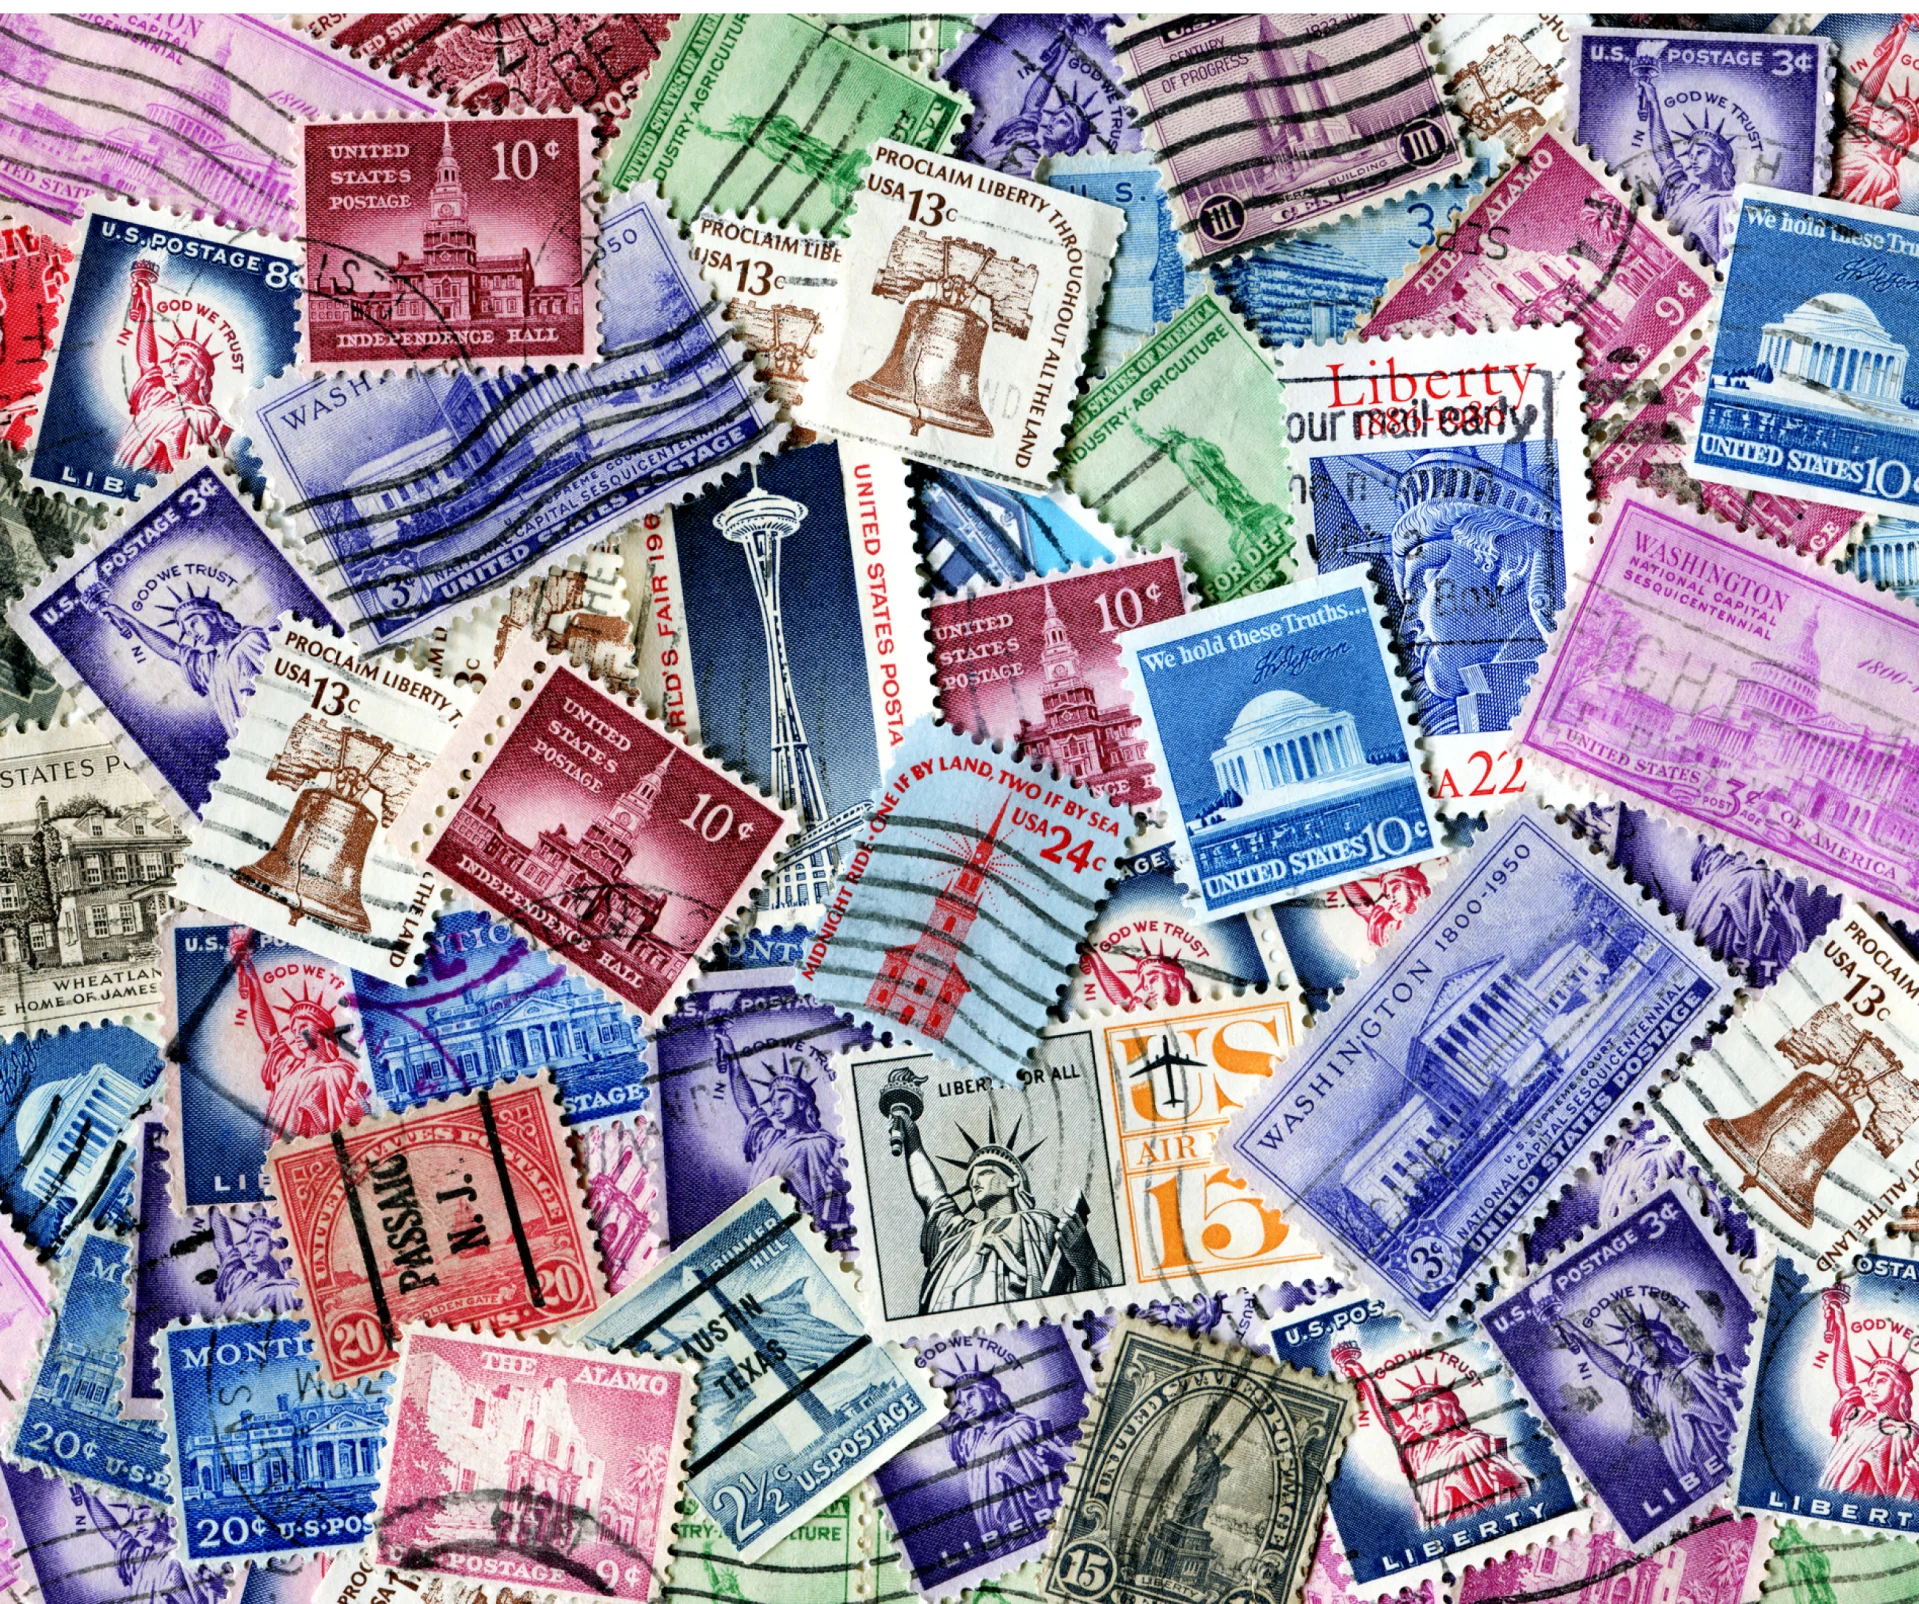 International postage stamps in a collage